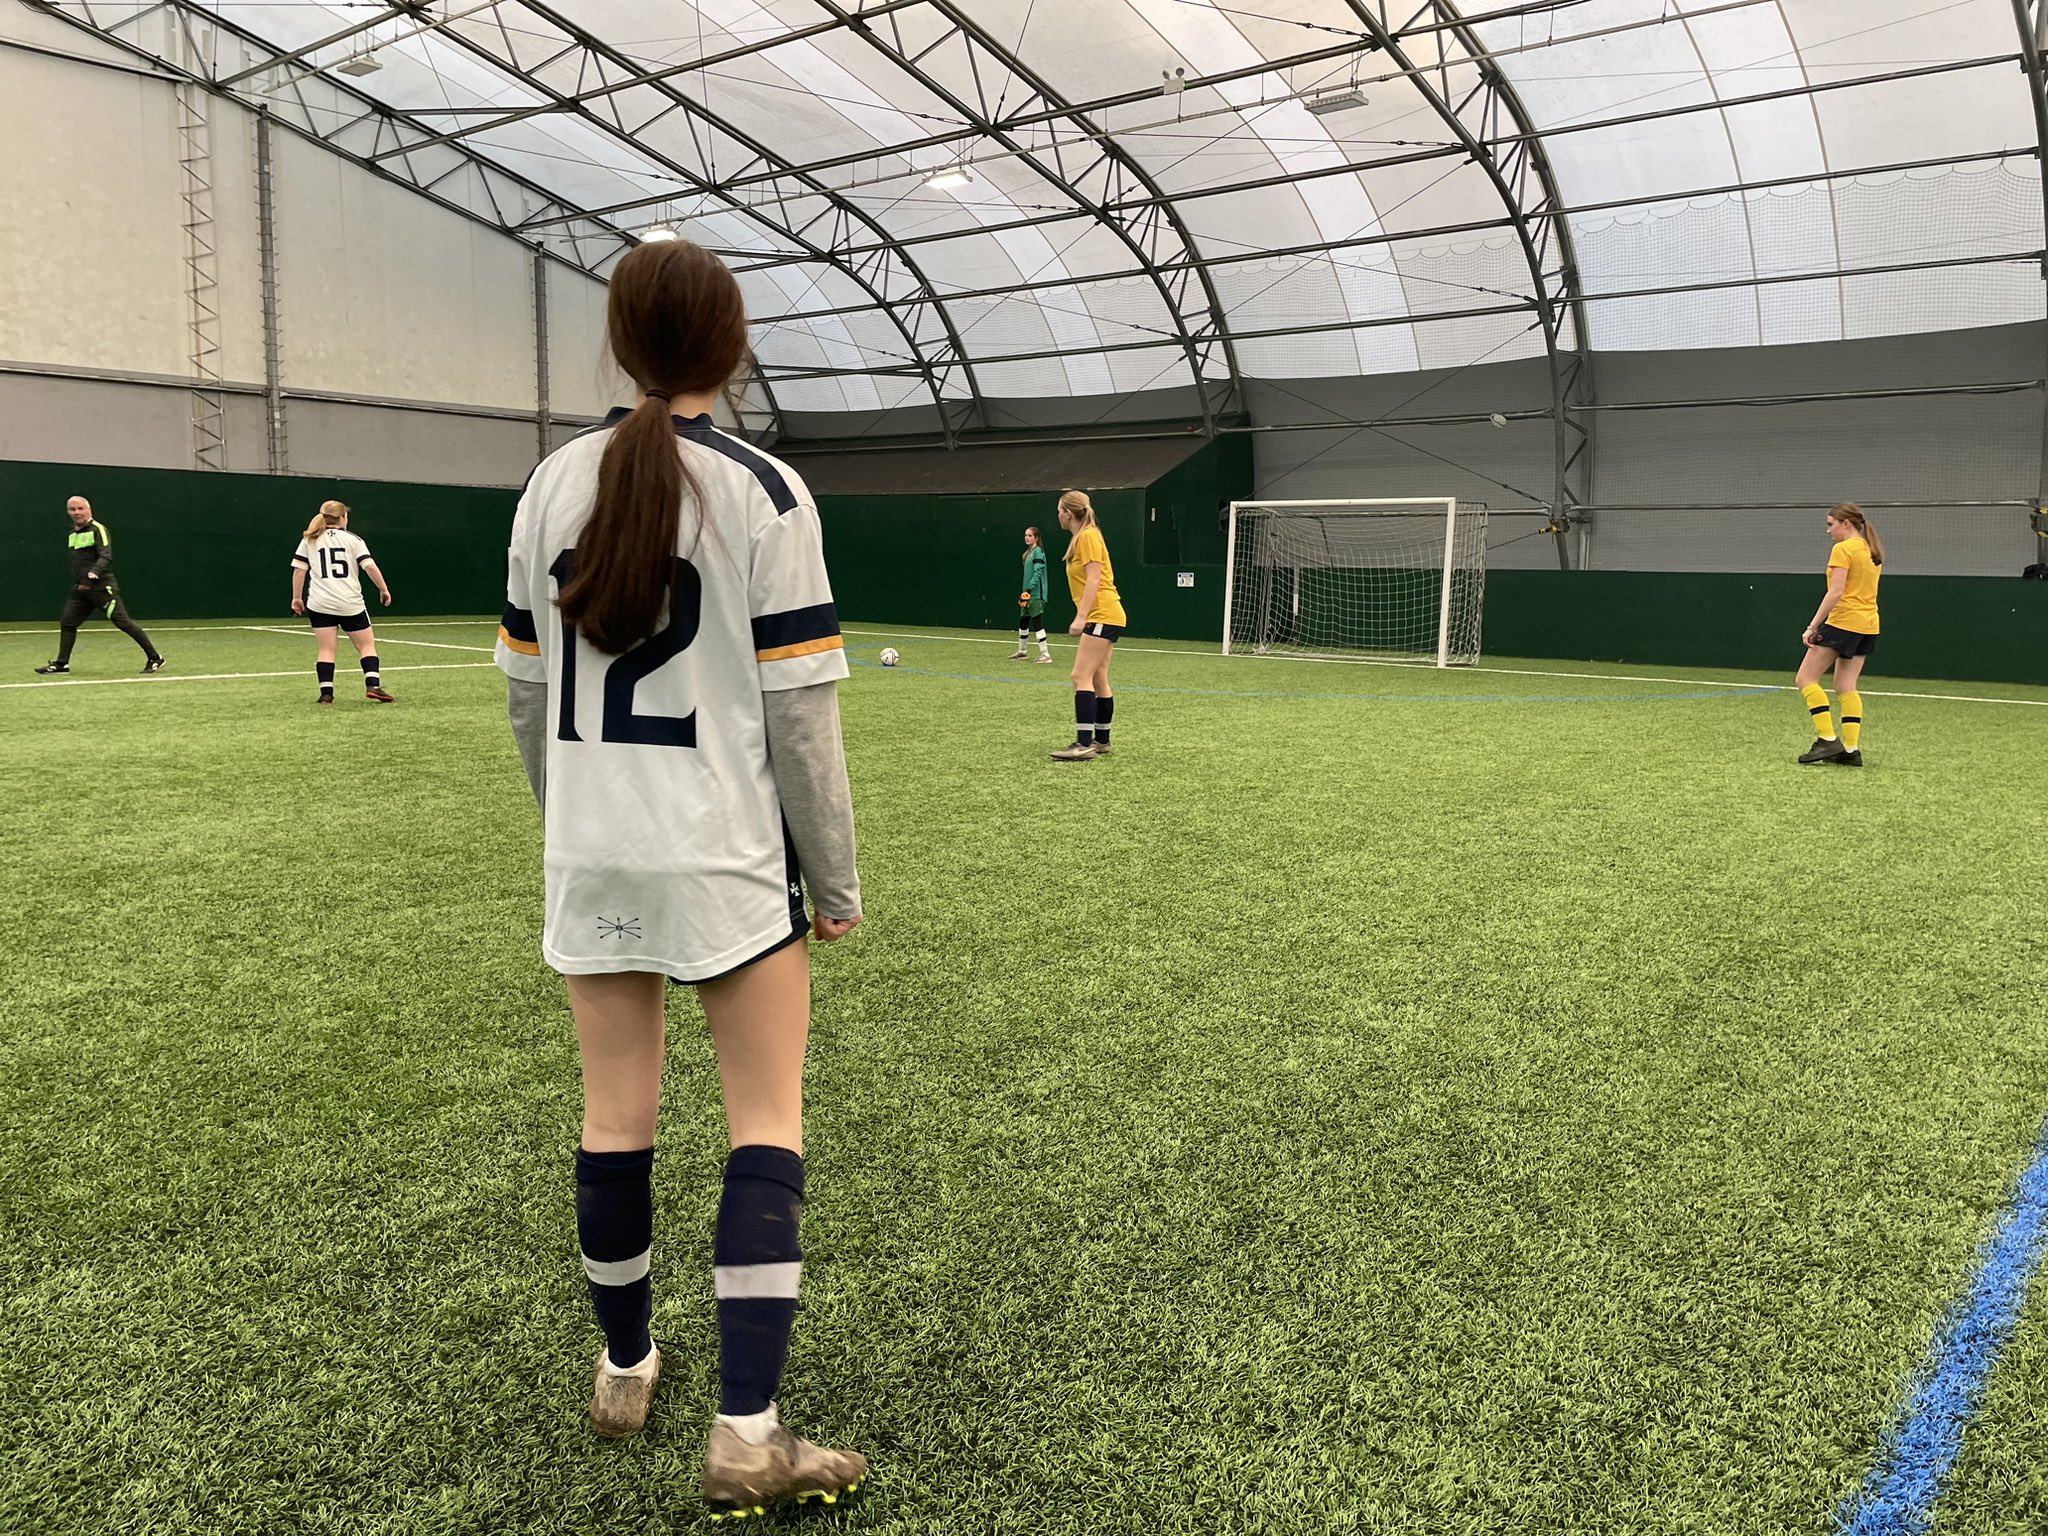 Girls' football fixtures are in full swing 